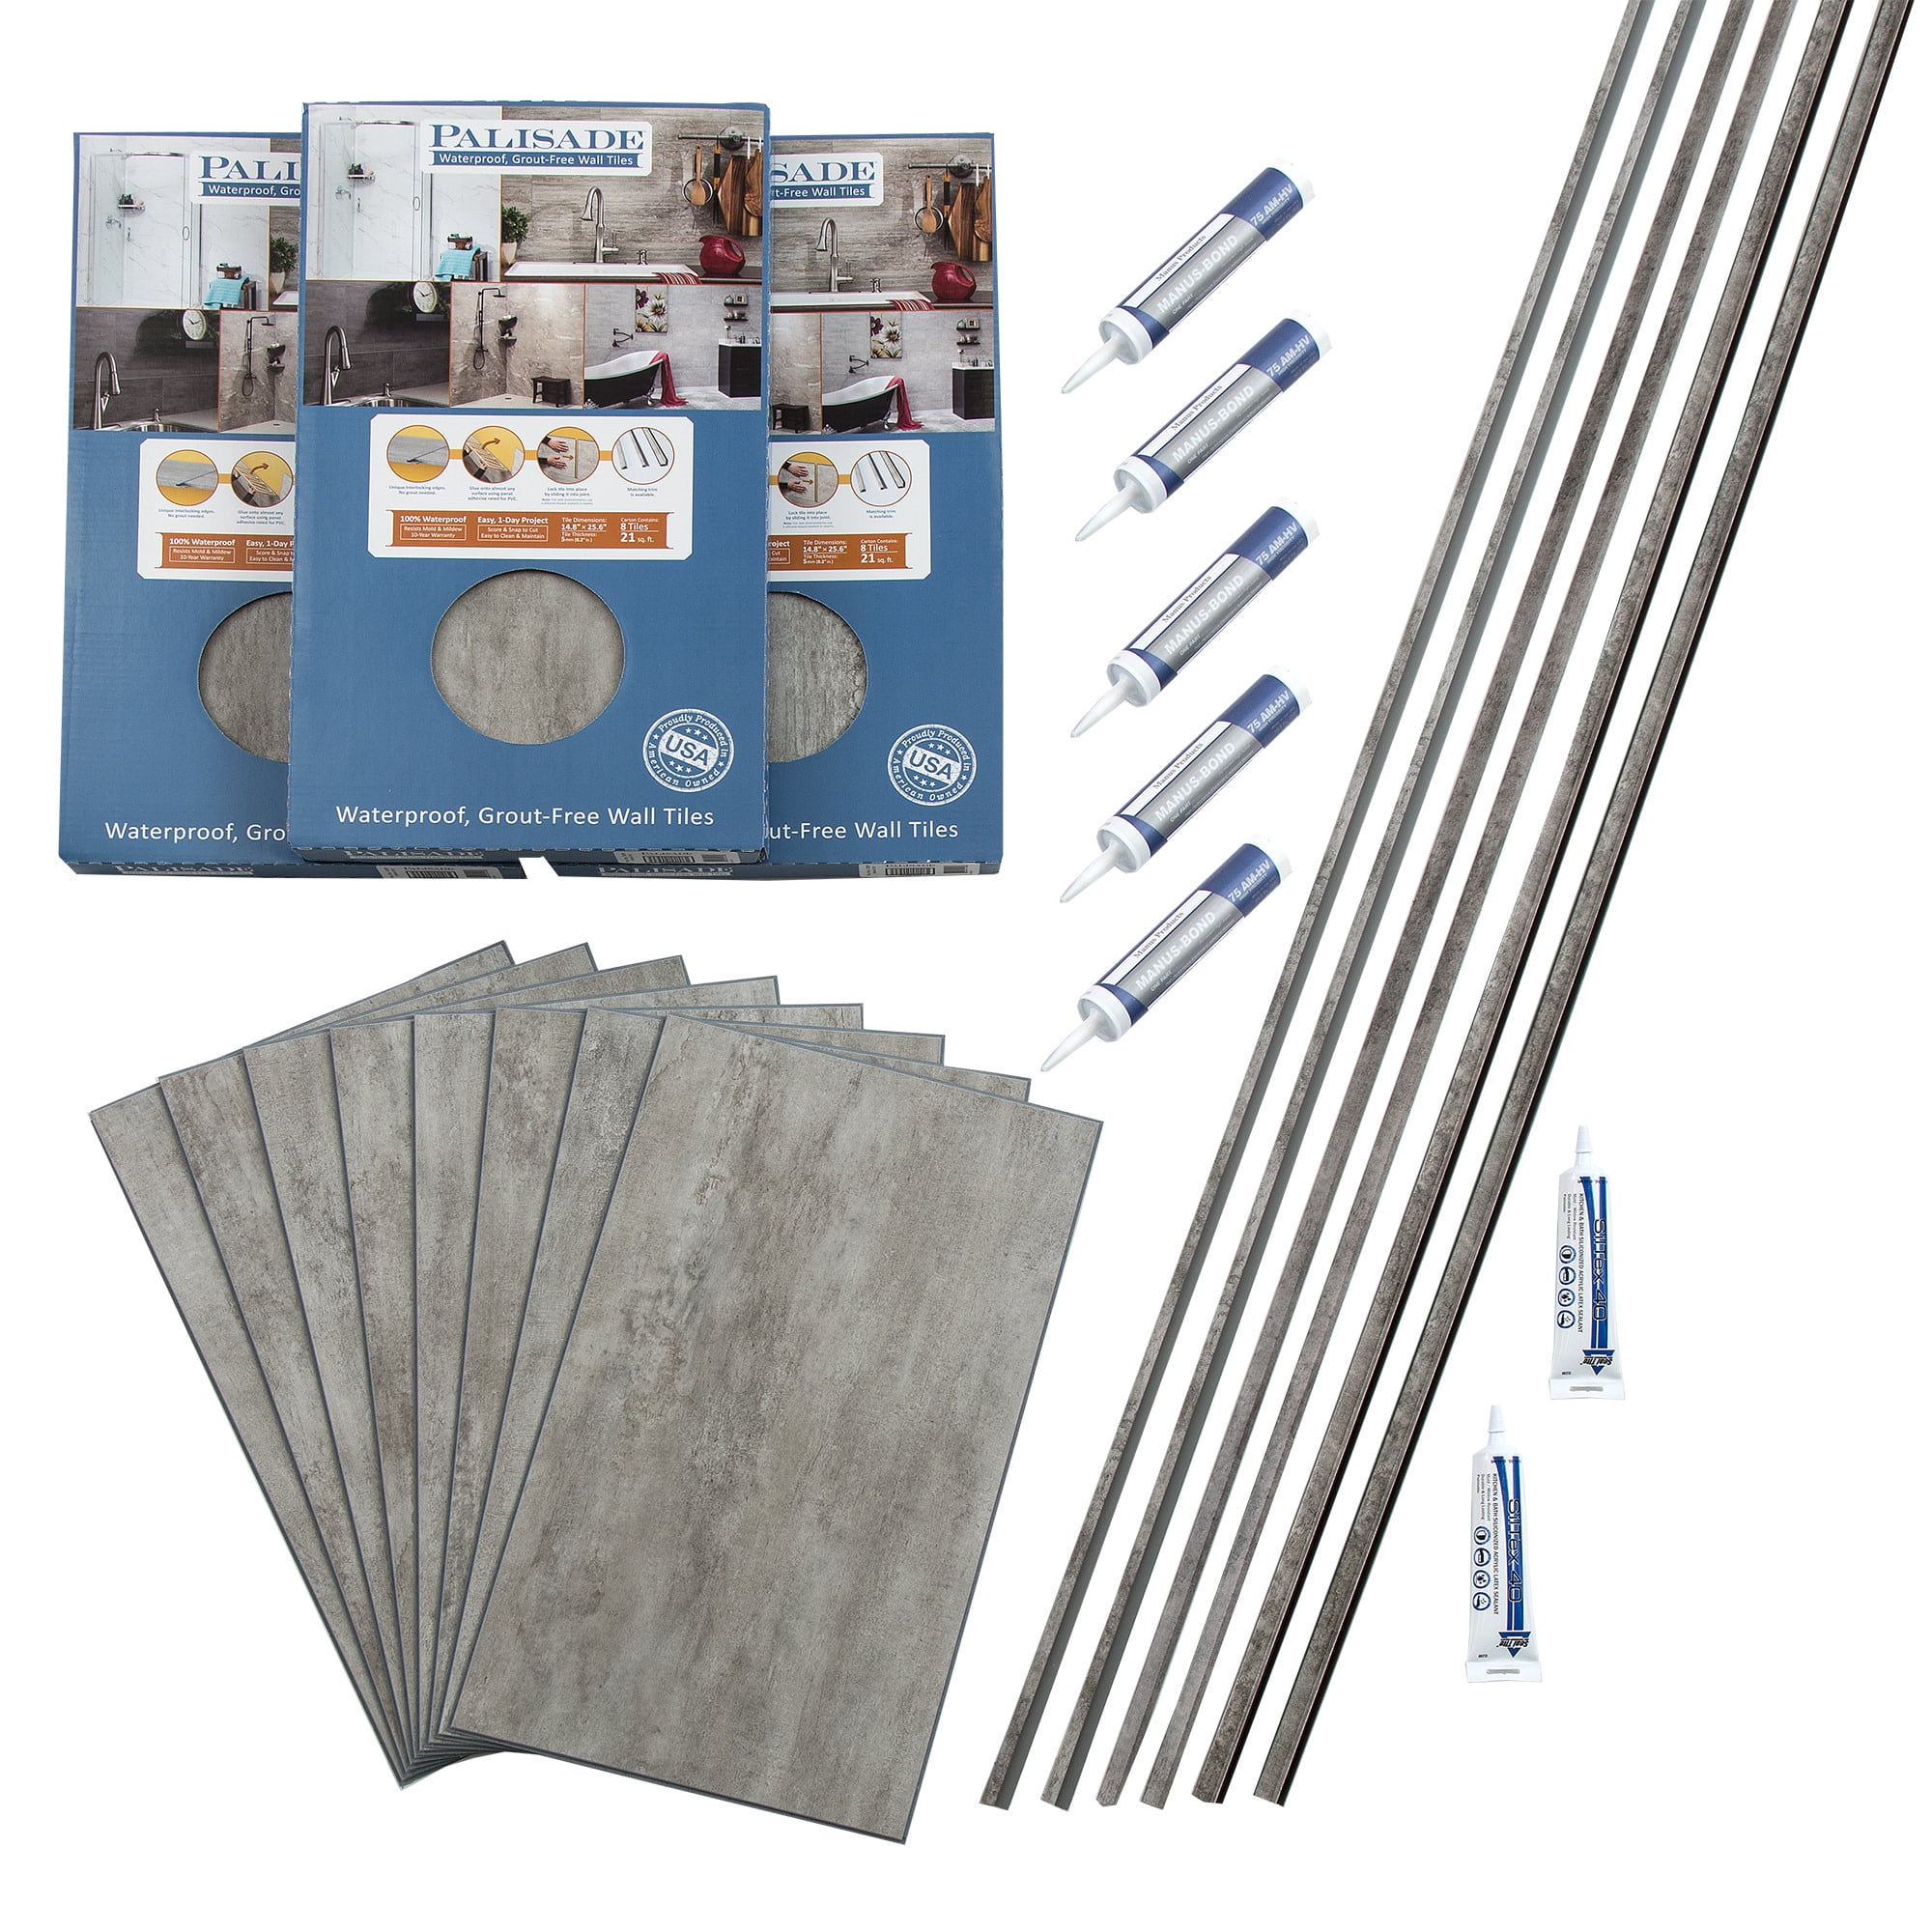 Palisade 23.2in x 11.1in Vinyl Wall Tile Shower Kit in Wintry Mix 